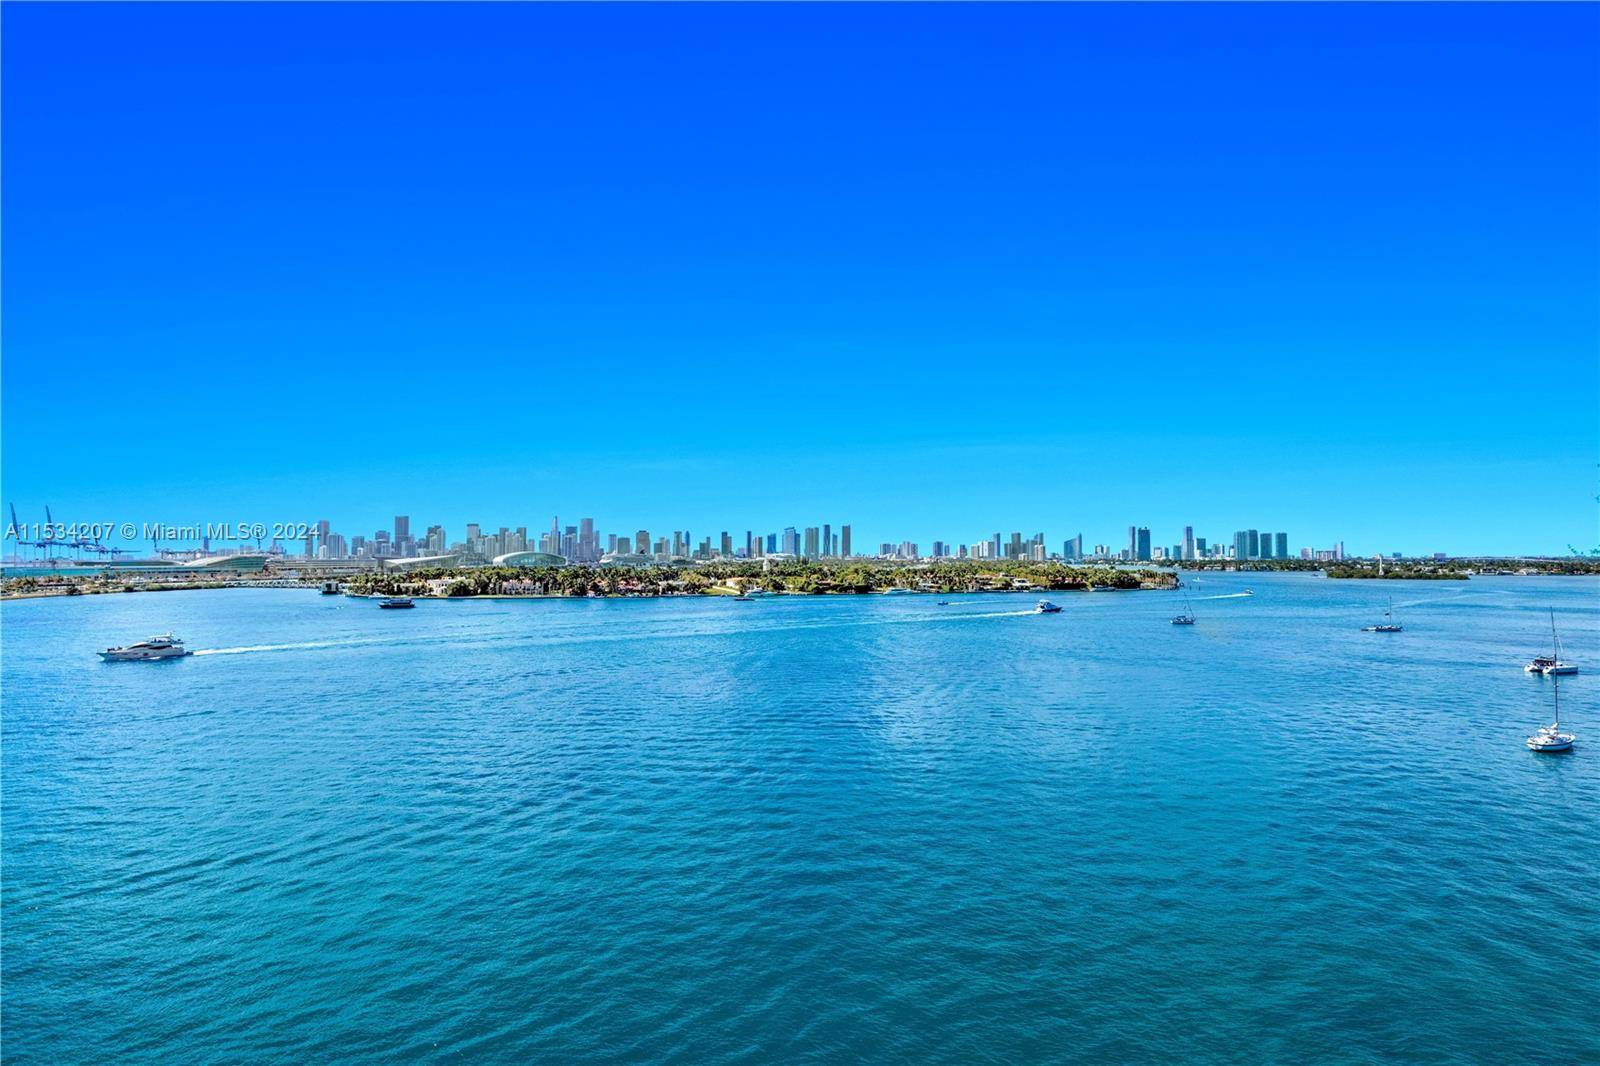 Fully remodeled southwest corner unit at the Floridian condominium boasting unobstructed vistas of both the bay downtown Miami from the wrap around balcony.